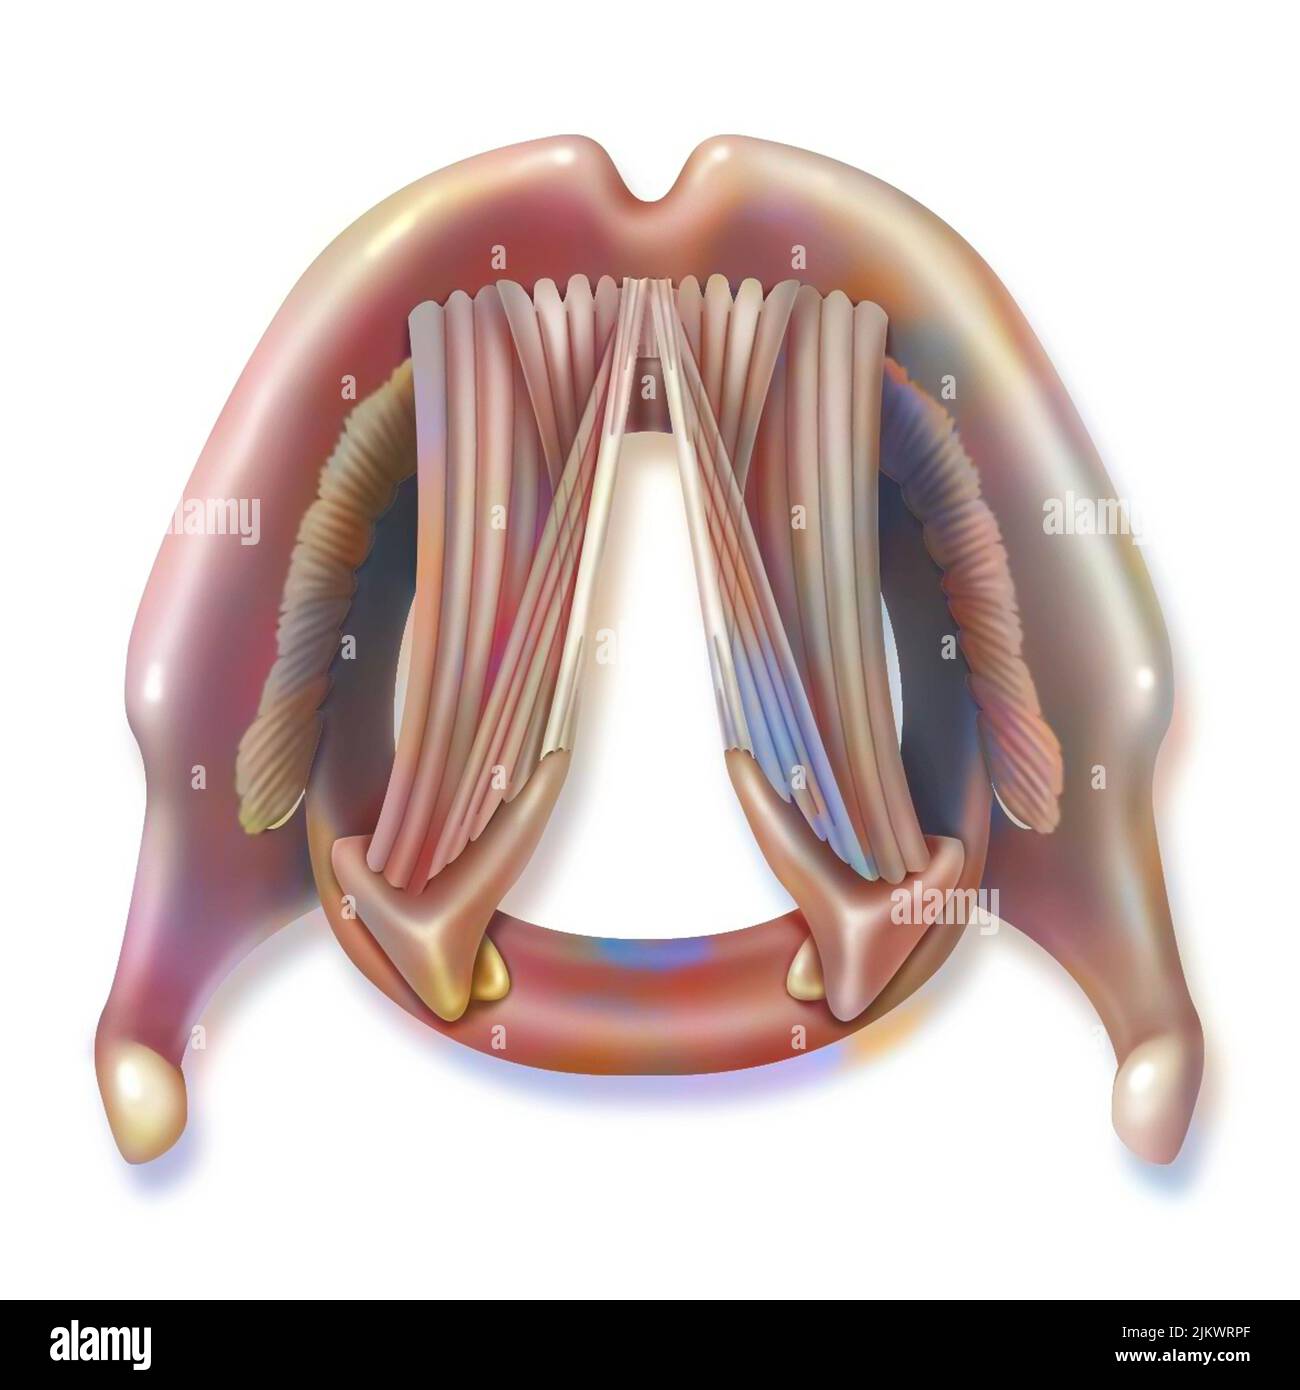 Top view larynx with vocal cords at rest. Stock Photo